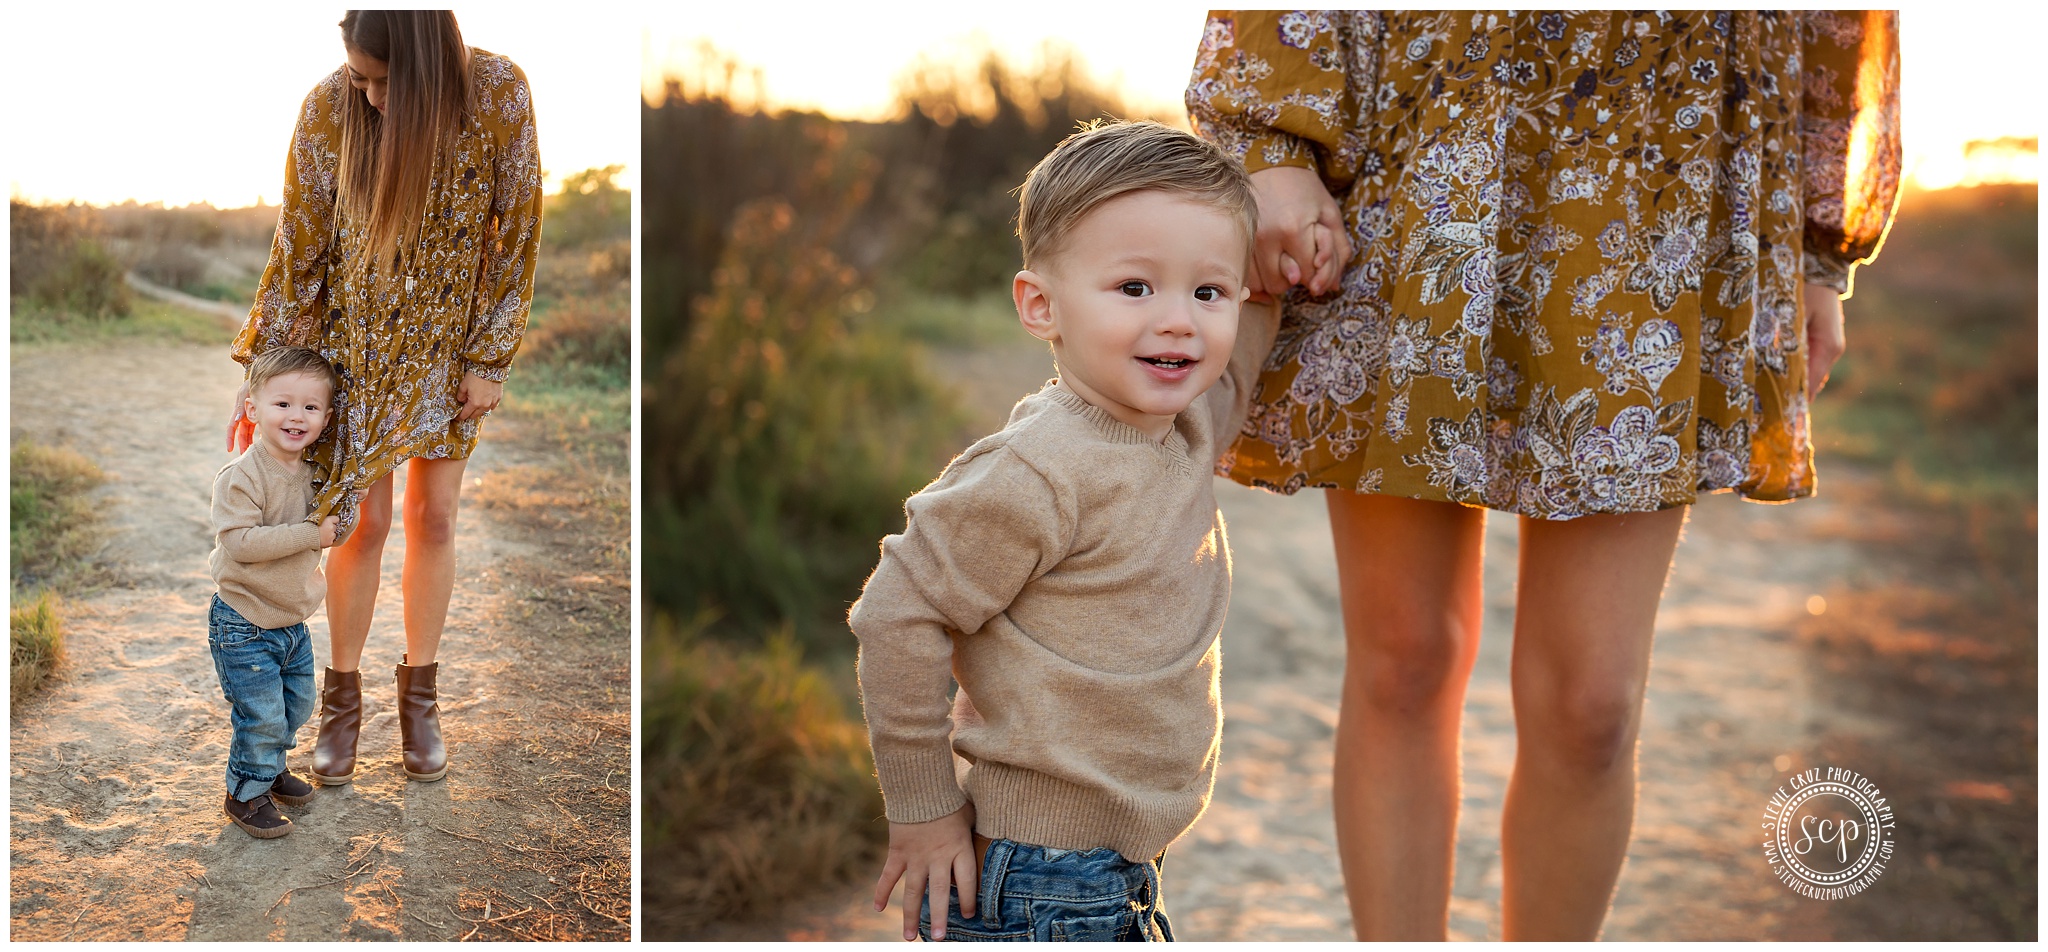 What to wear for fall family photos in california? Stevie Cruz Photography captures this stylish boho style family shoot. Love the photos of mom and son